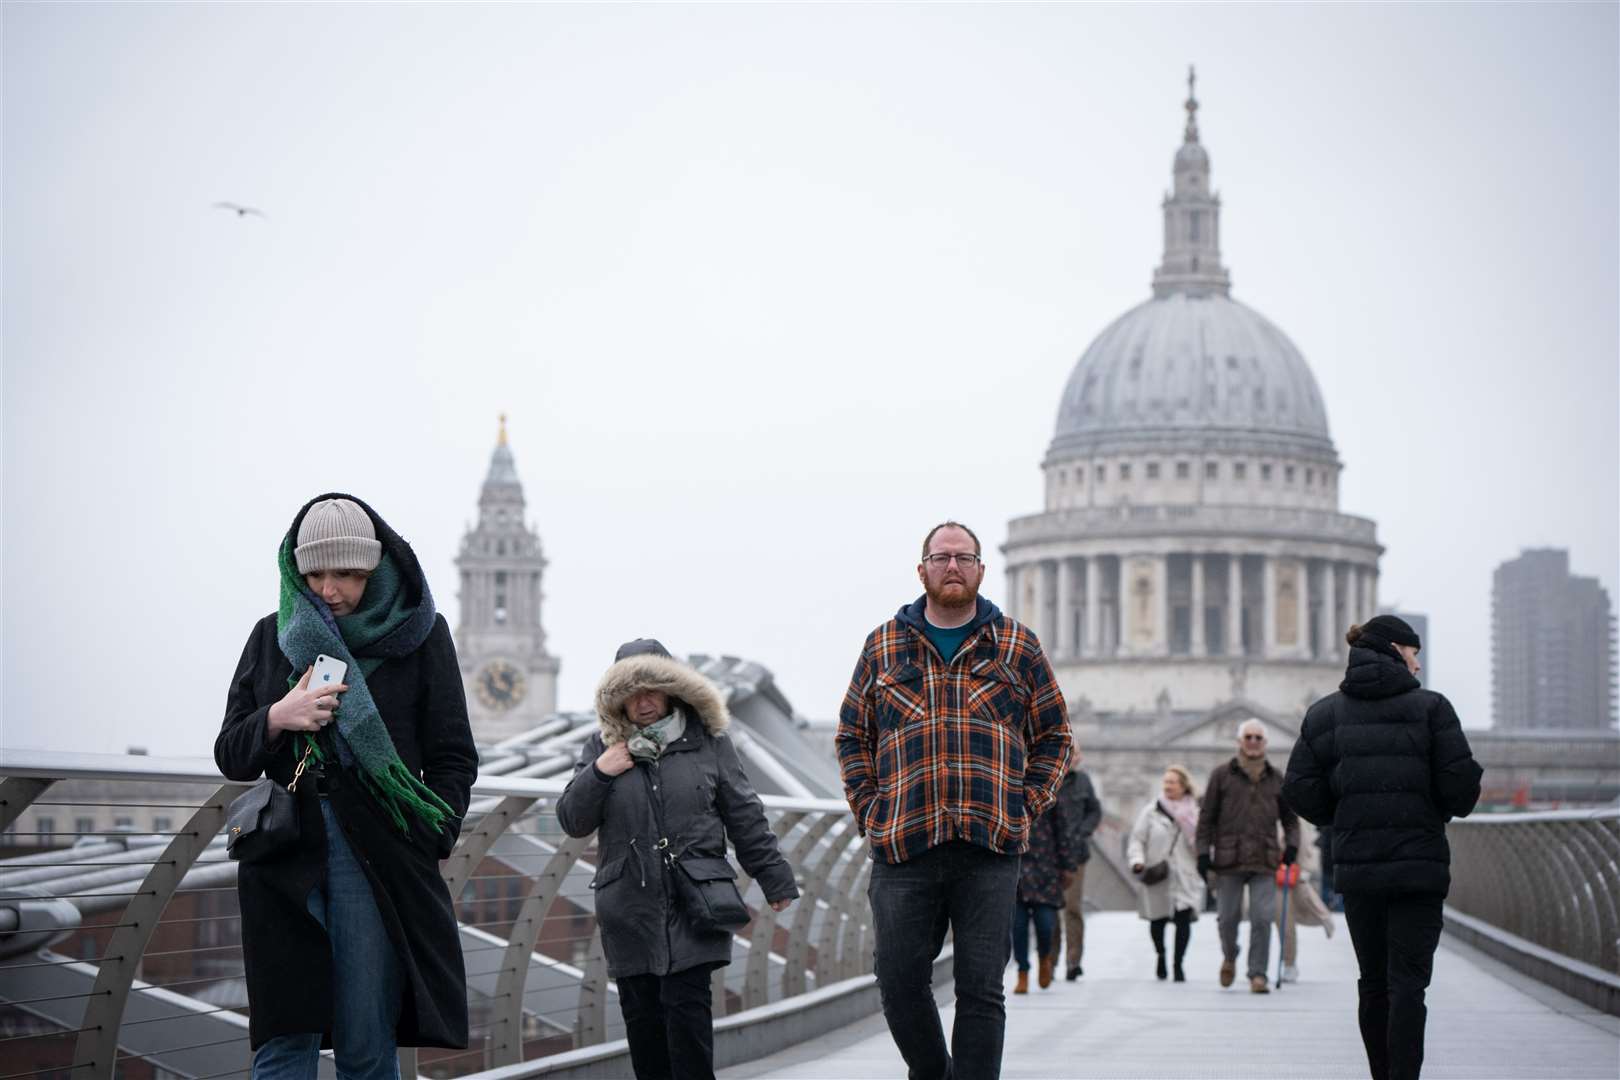 Pedestrians shield themselves from the wind and rain as they cross the Millennium Bridge, in London (Dominic Lipinski/PA)